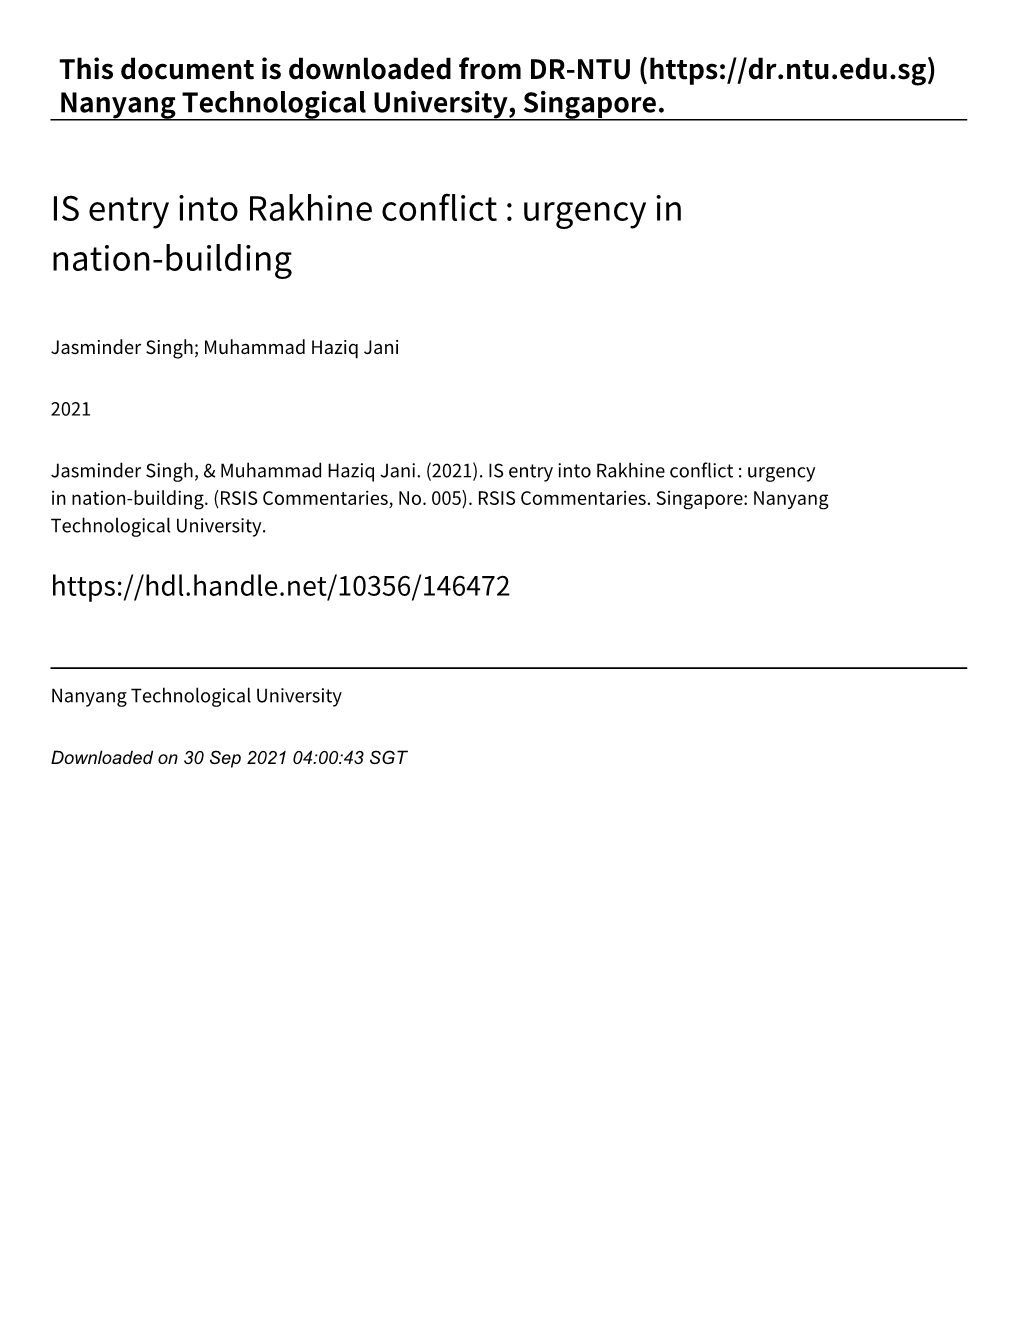 IS Entry Into Rakhine Conflict : Urgency in Nation‑Building